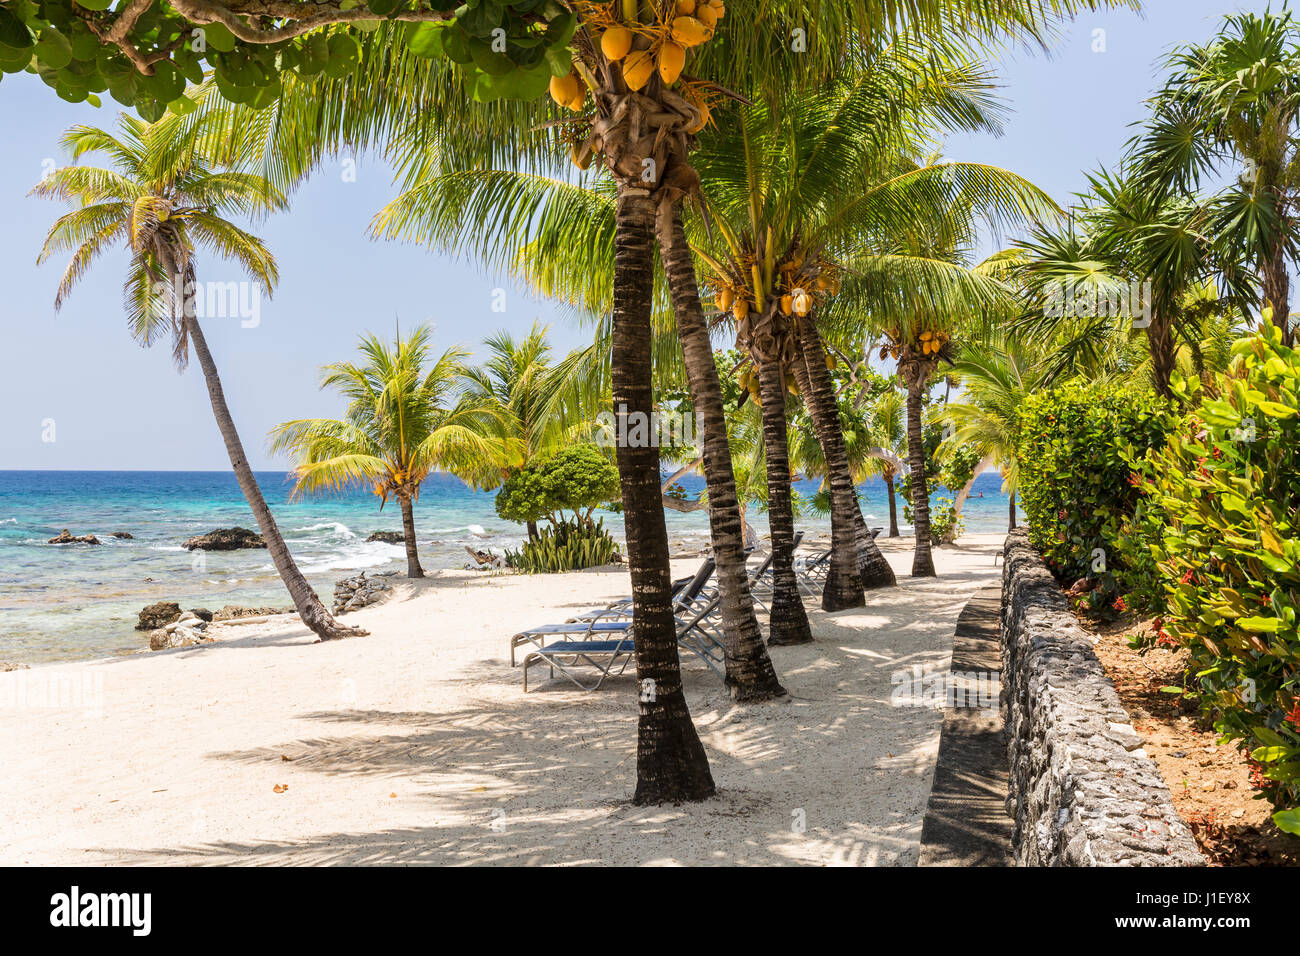 Palm trees and a stone wall line the beautiful sandy beach at Lighthouse Point near the Meridian Resort in Roatan, Honduras. Stock Photo